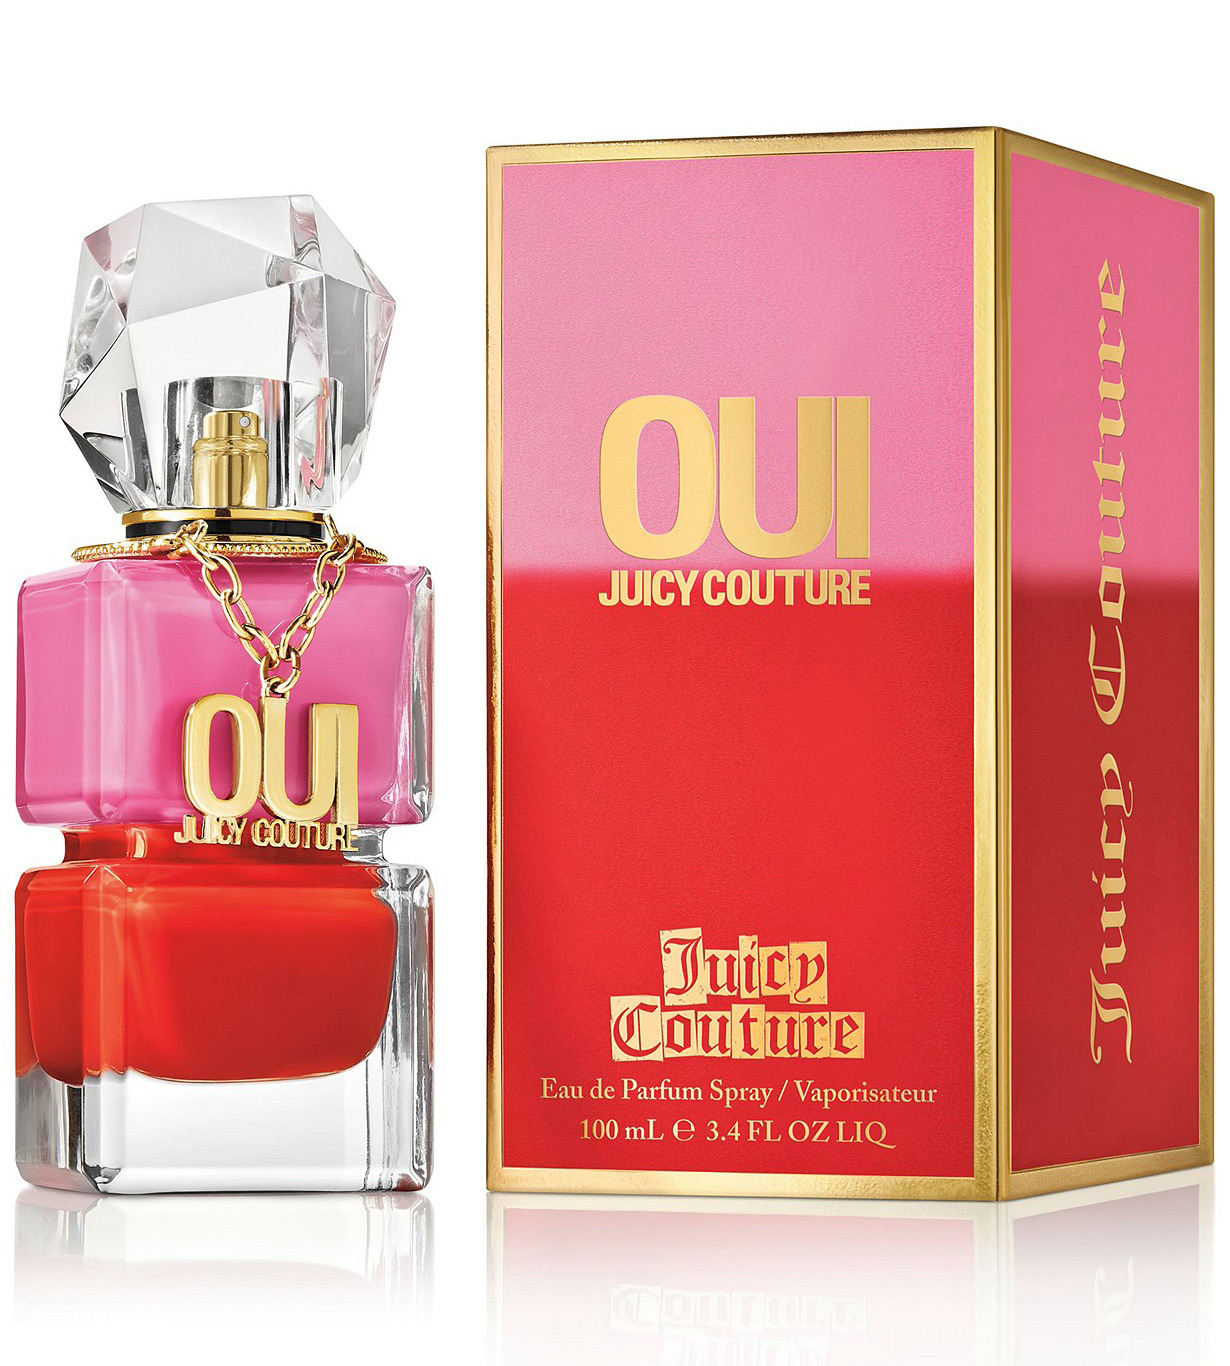 Juicy Couture Oui Juicy Couture perfume - a new fragrance for women 2018